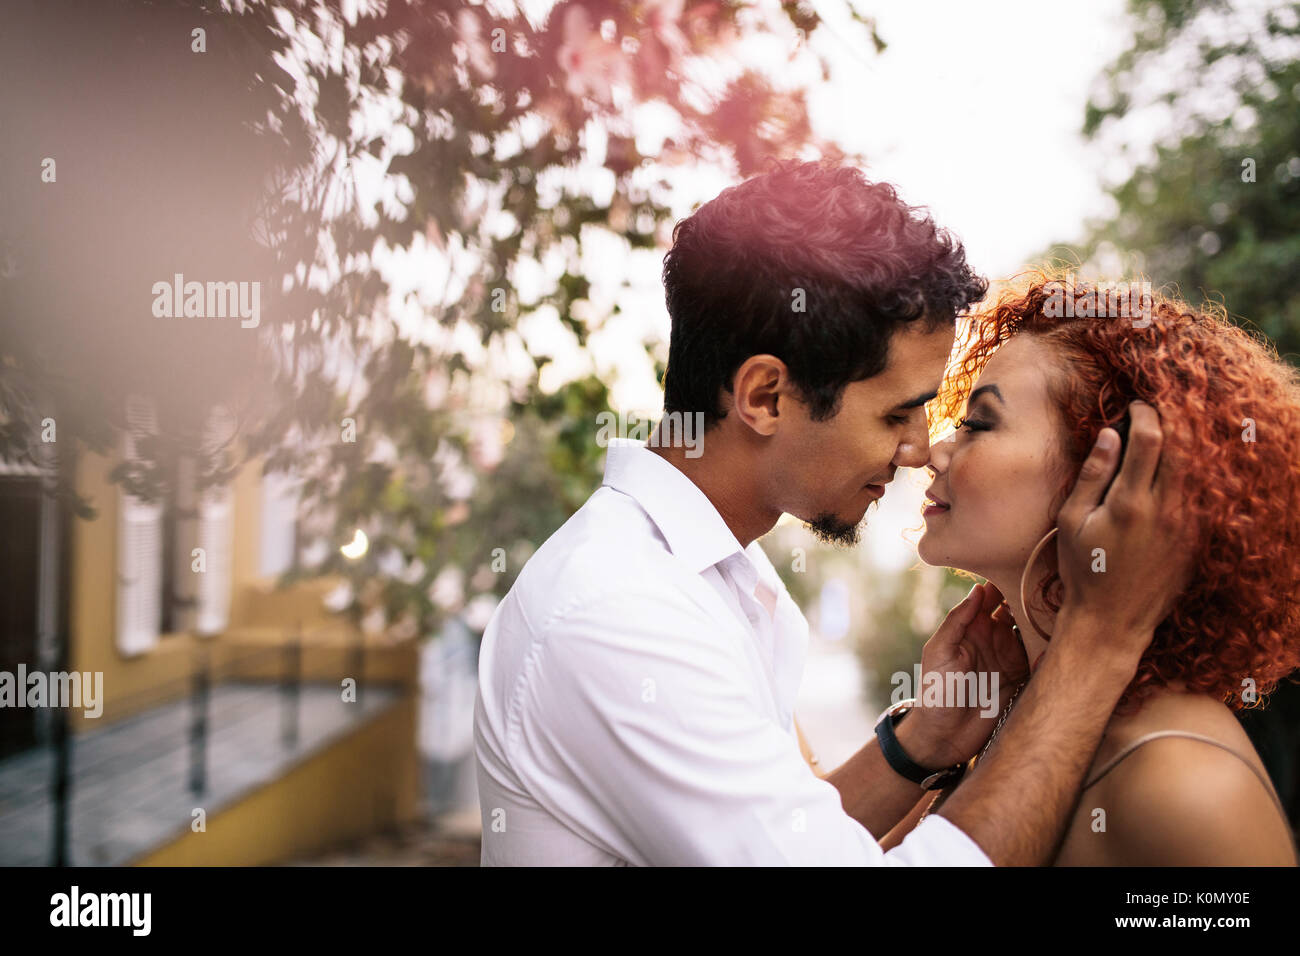 Young Happy Romantic Couple Love Kissing Stock Photo 441838708 |  Shutterstock